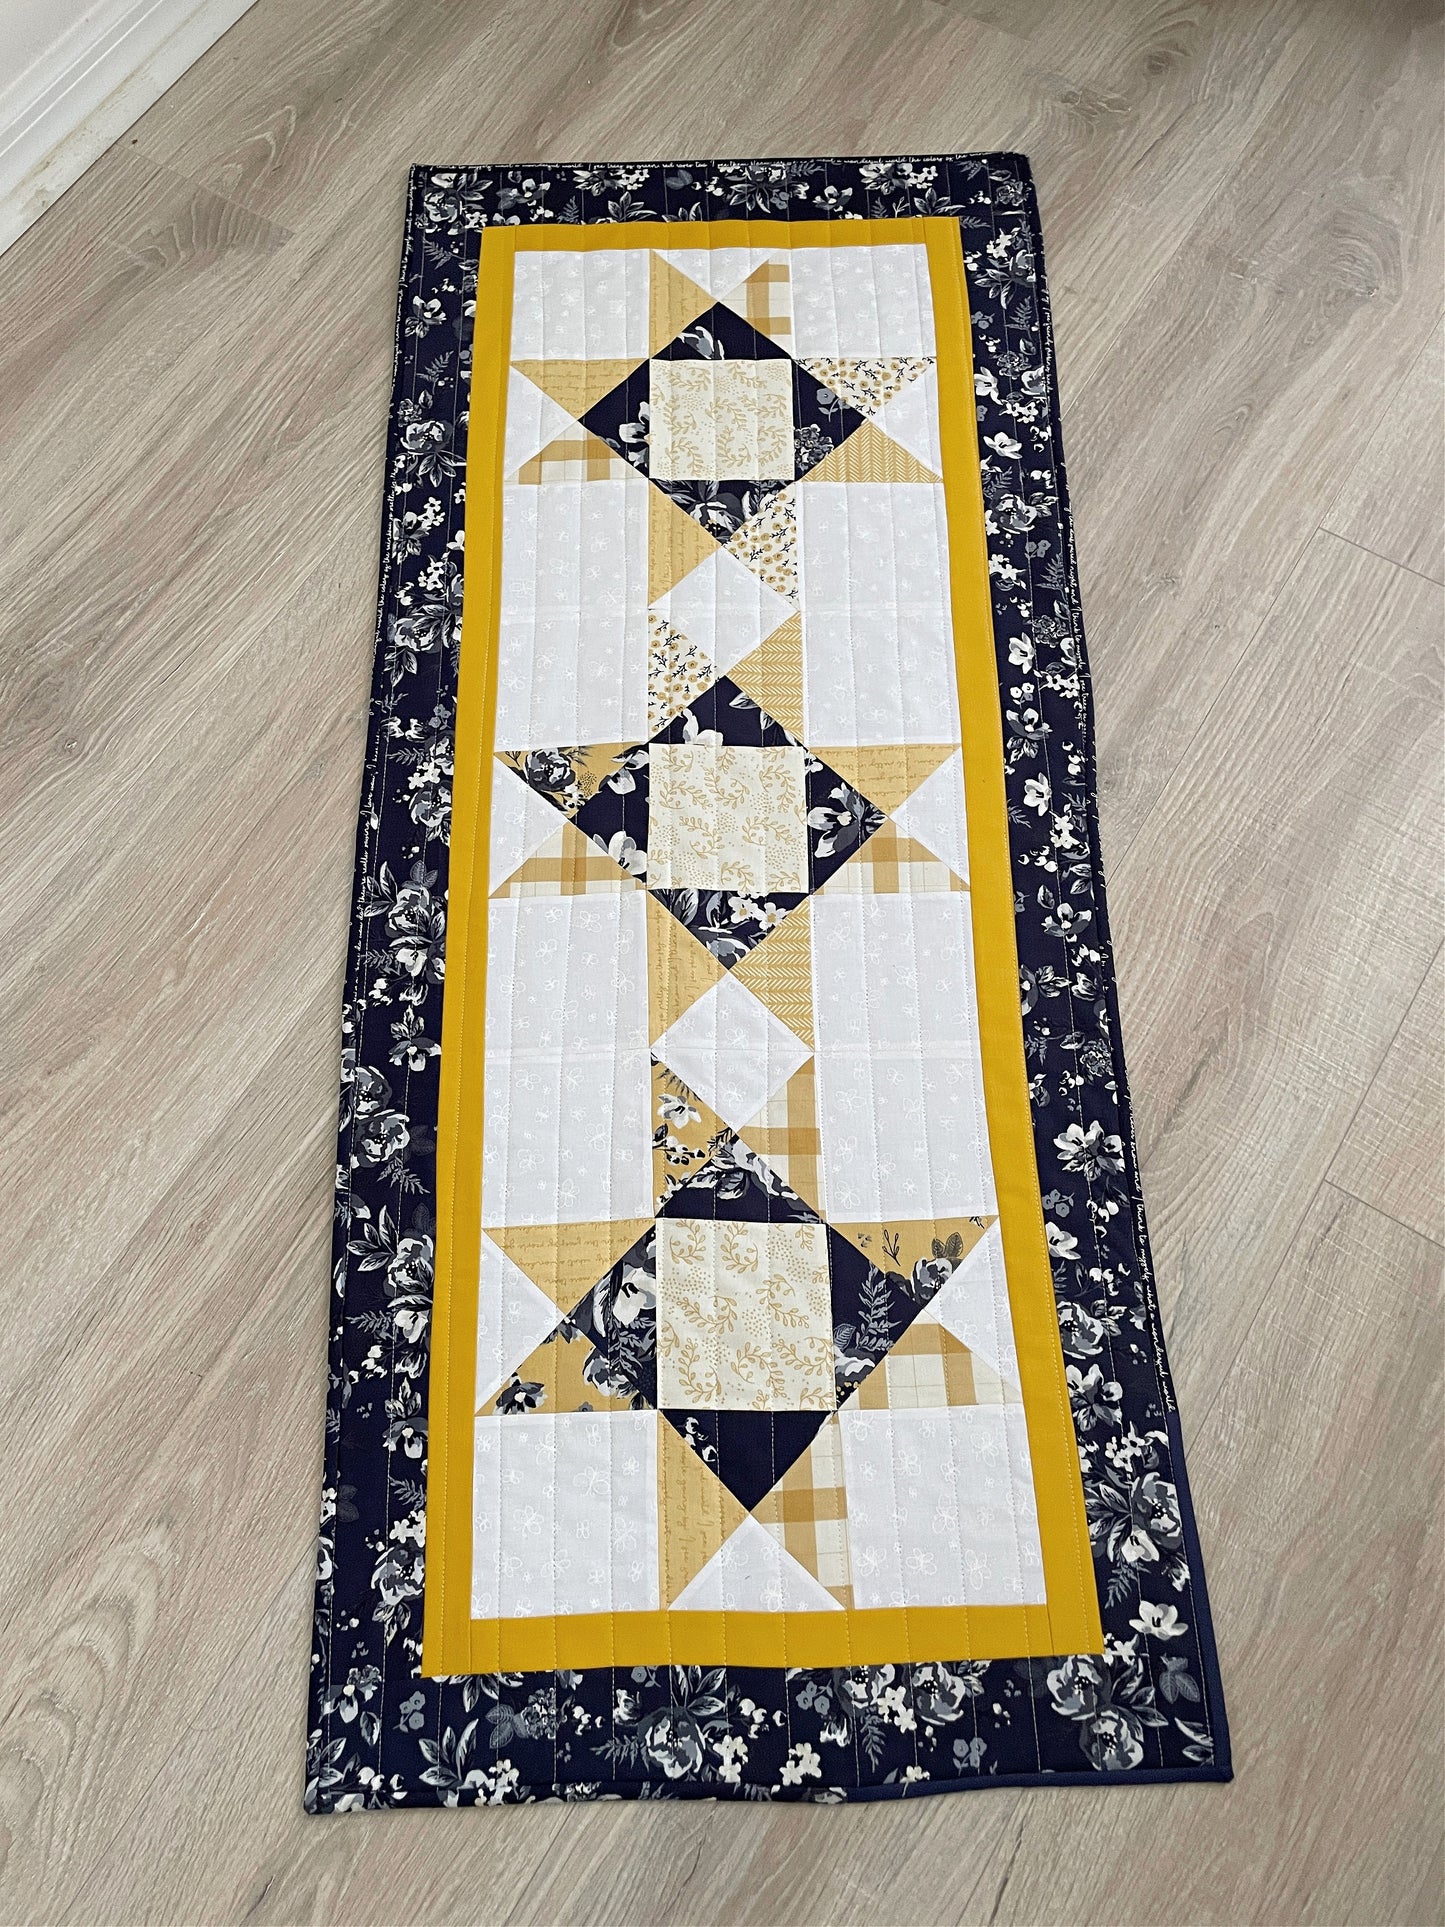 Handmade Quilted Table Runner in Blue, Yellow, White & Gray Colors